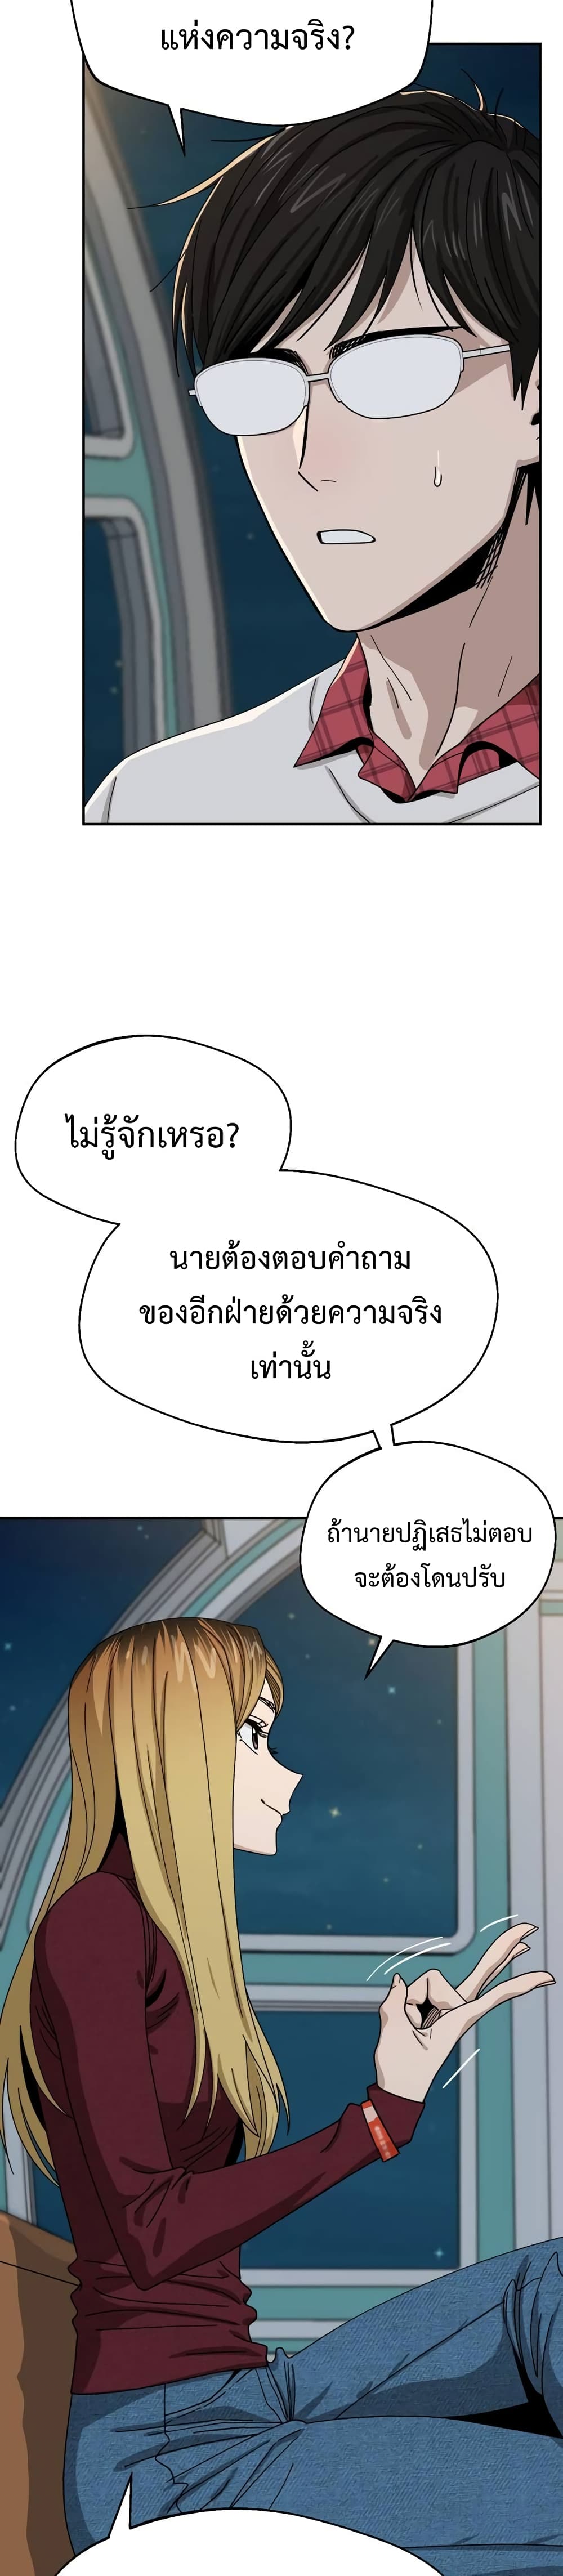 Match Made in Heaven by chance ตอนที่ 36 (4)